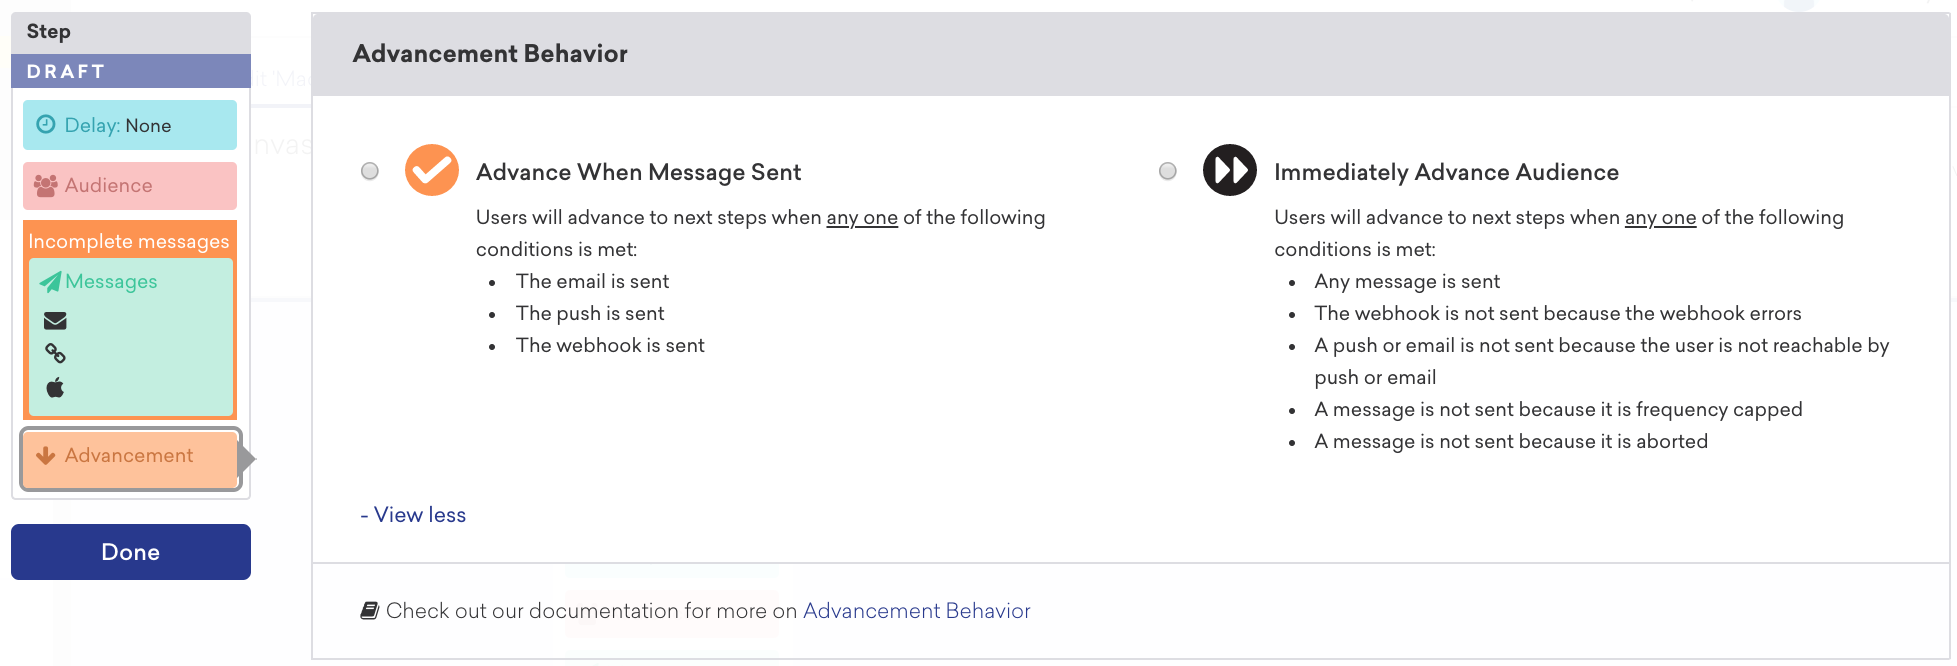 Advancement Behavior settings with two options to either advance the audience when the message is sent, or to immediately advance the audience.